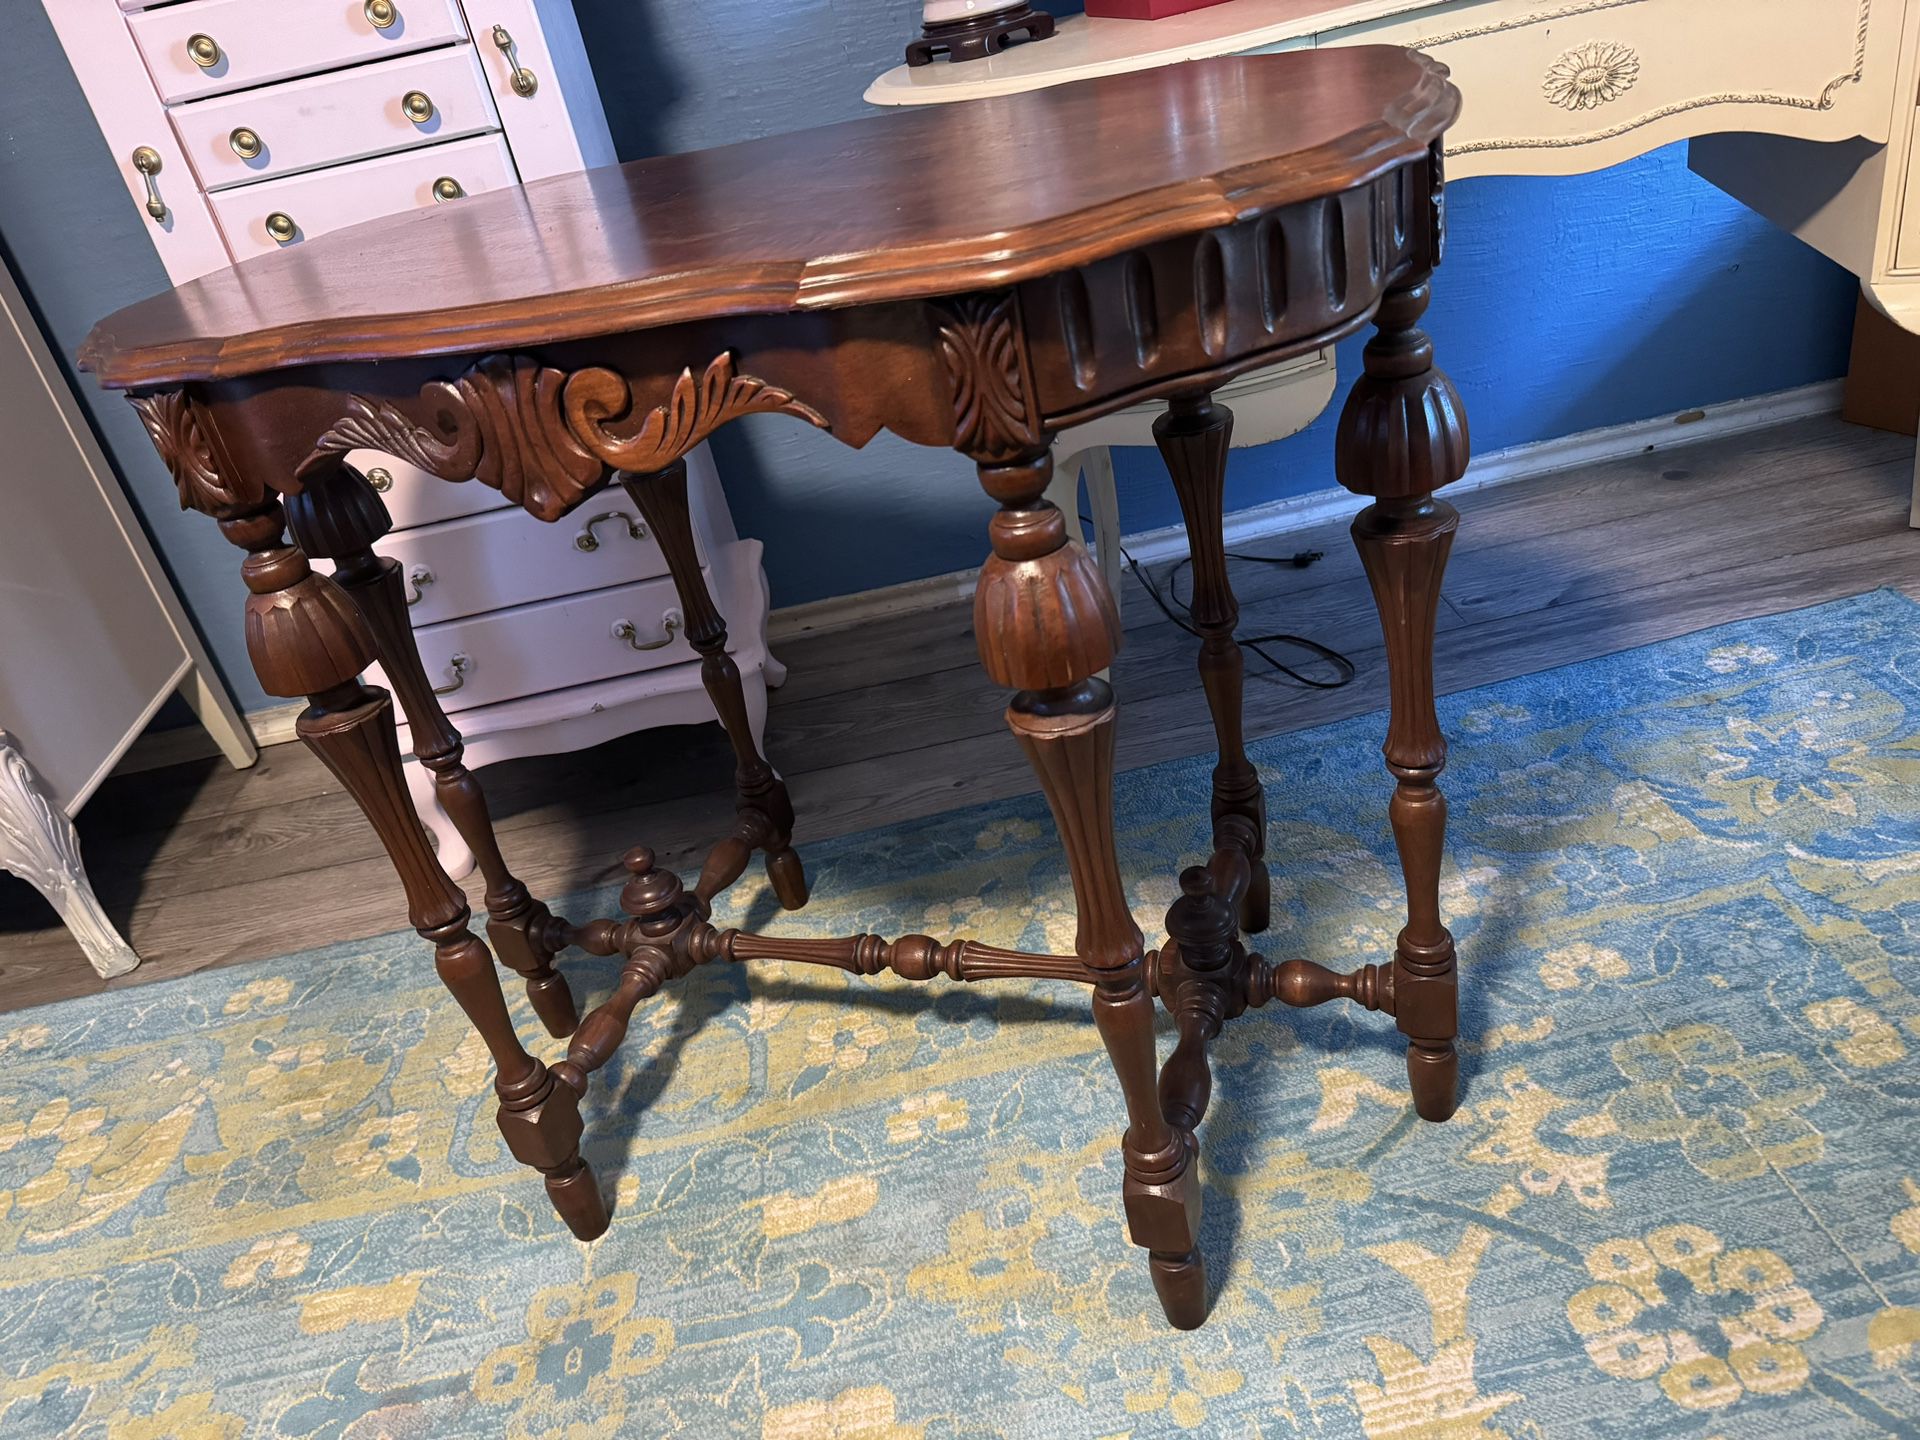 Small Antique Table 